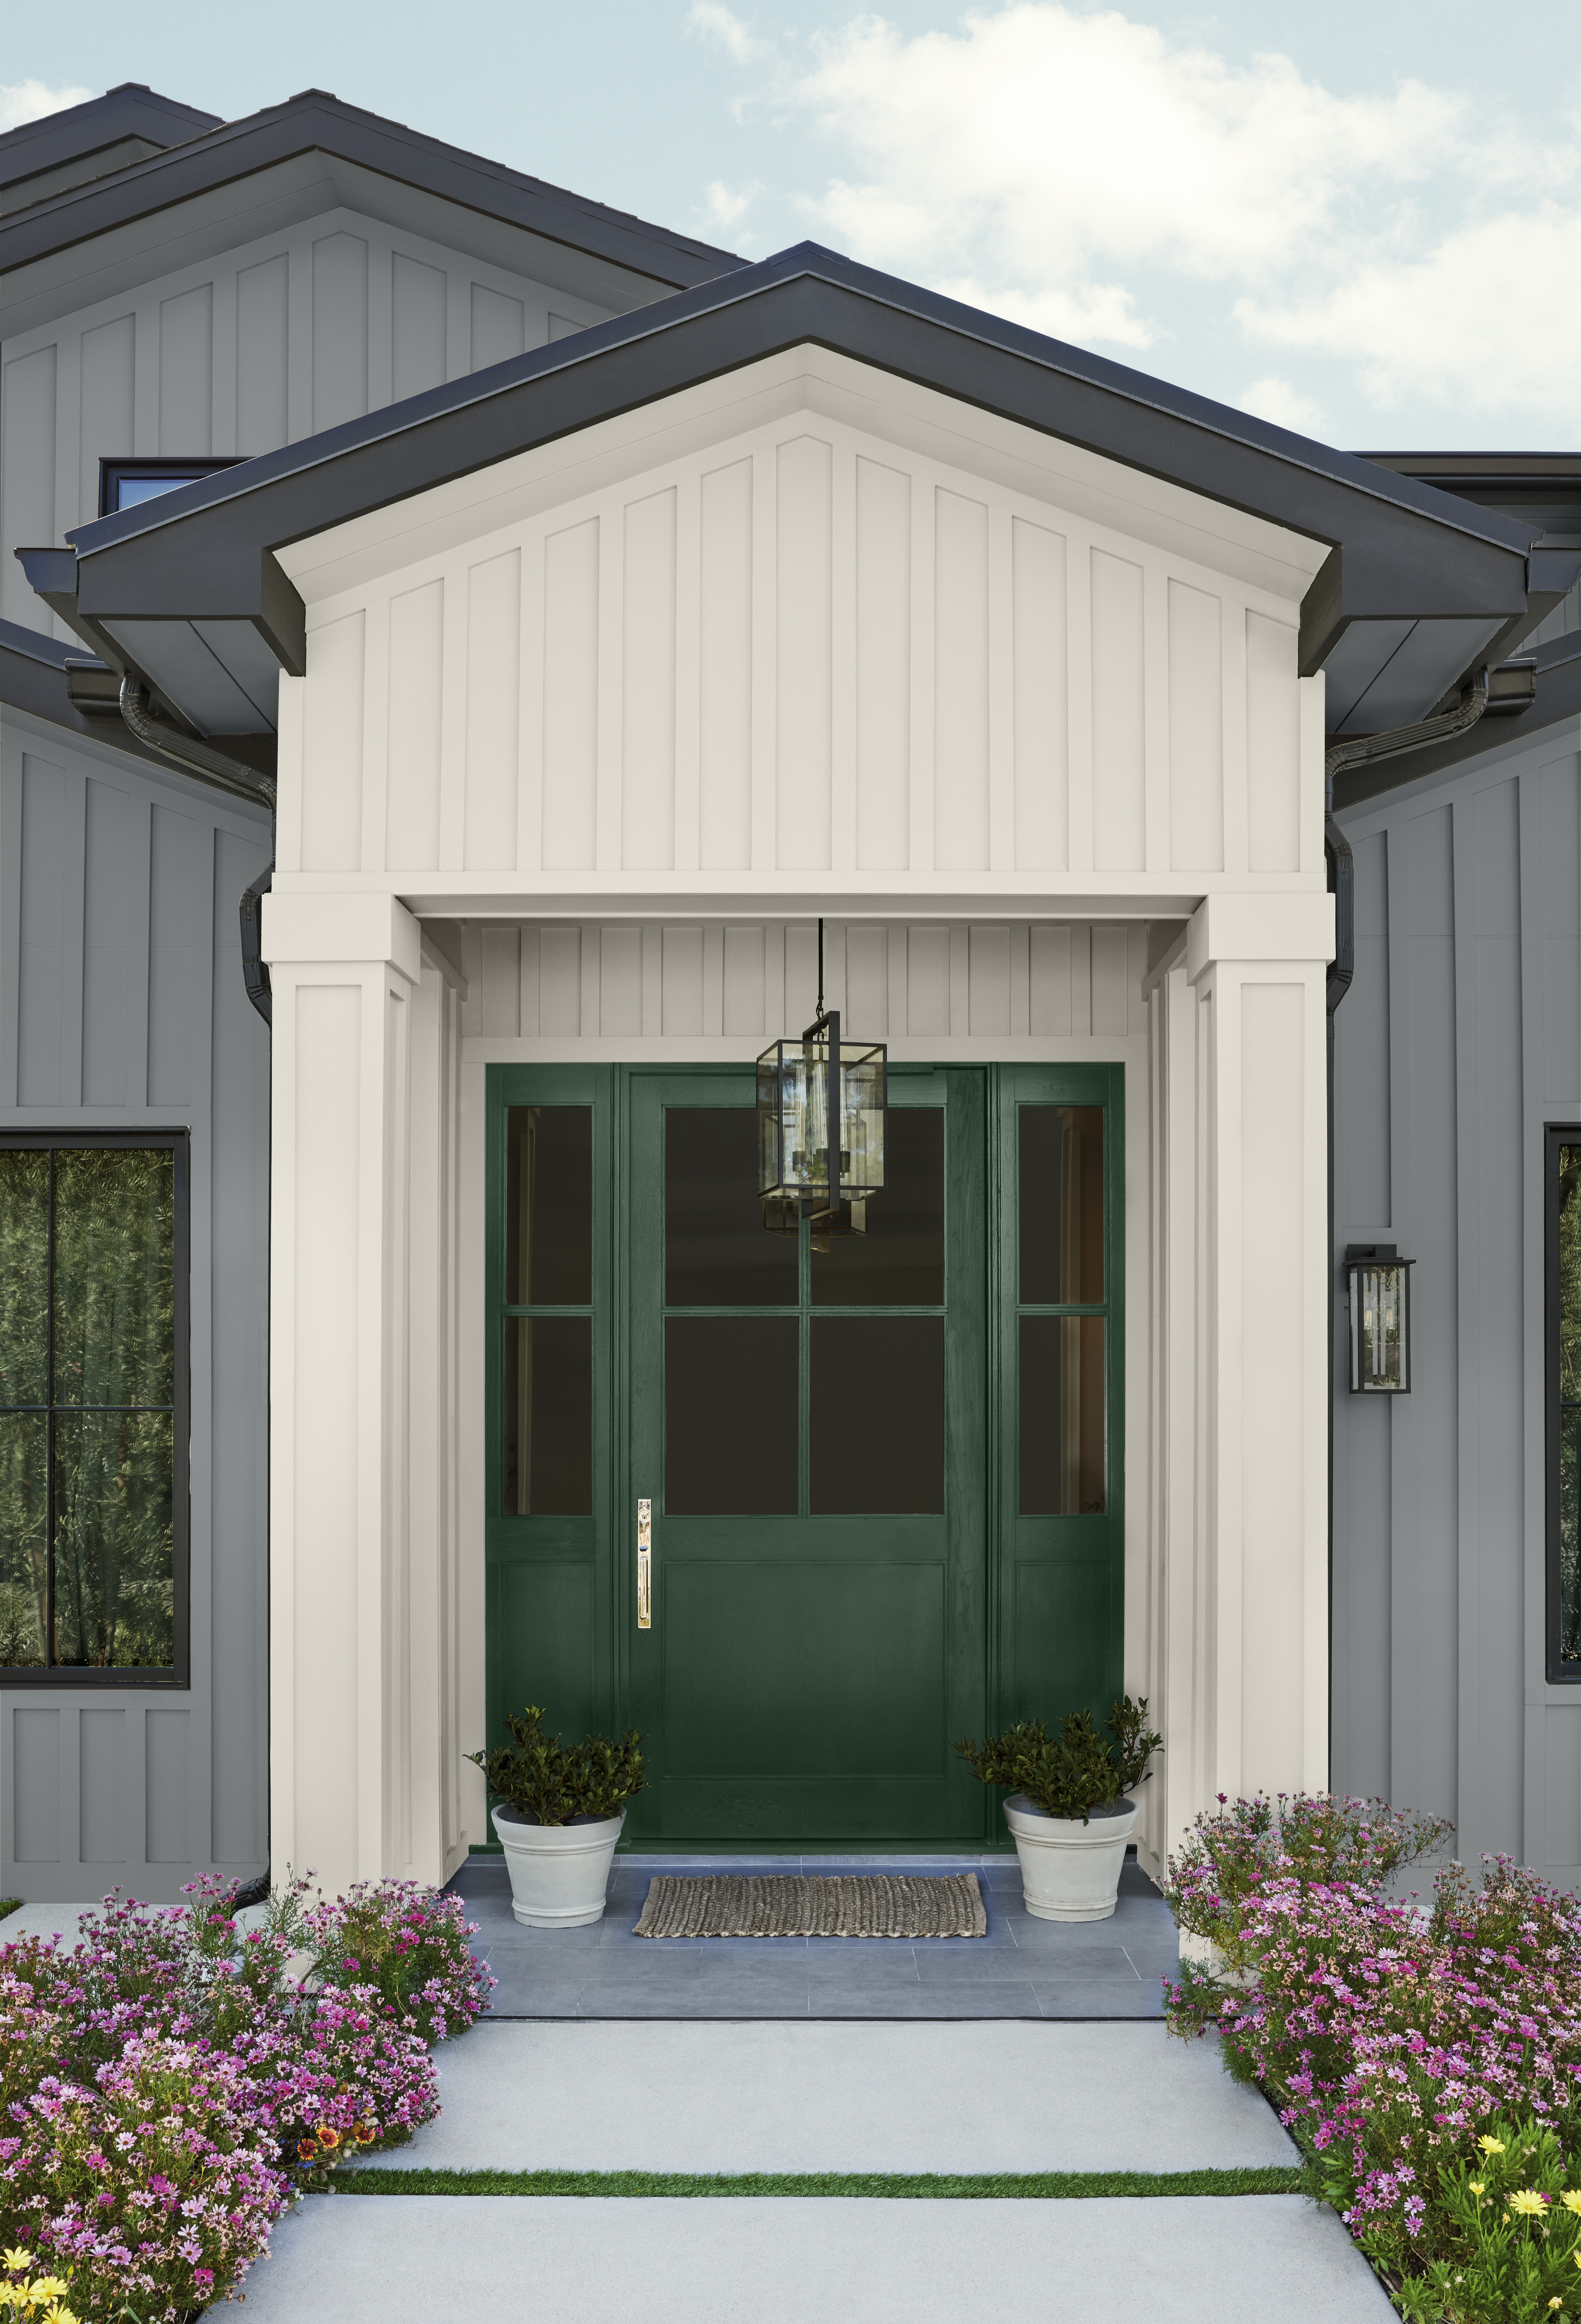 The grey and white exterior of a home with the front door painted in a deep green colour.